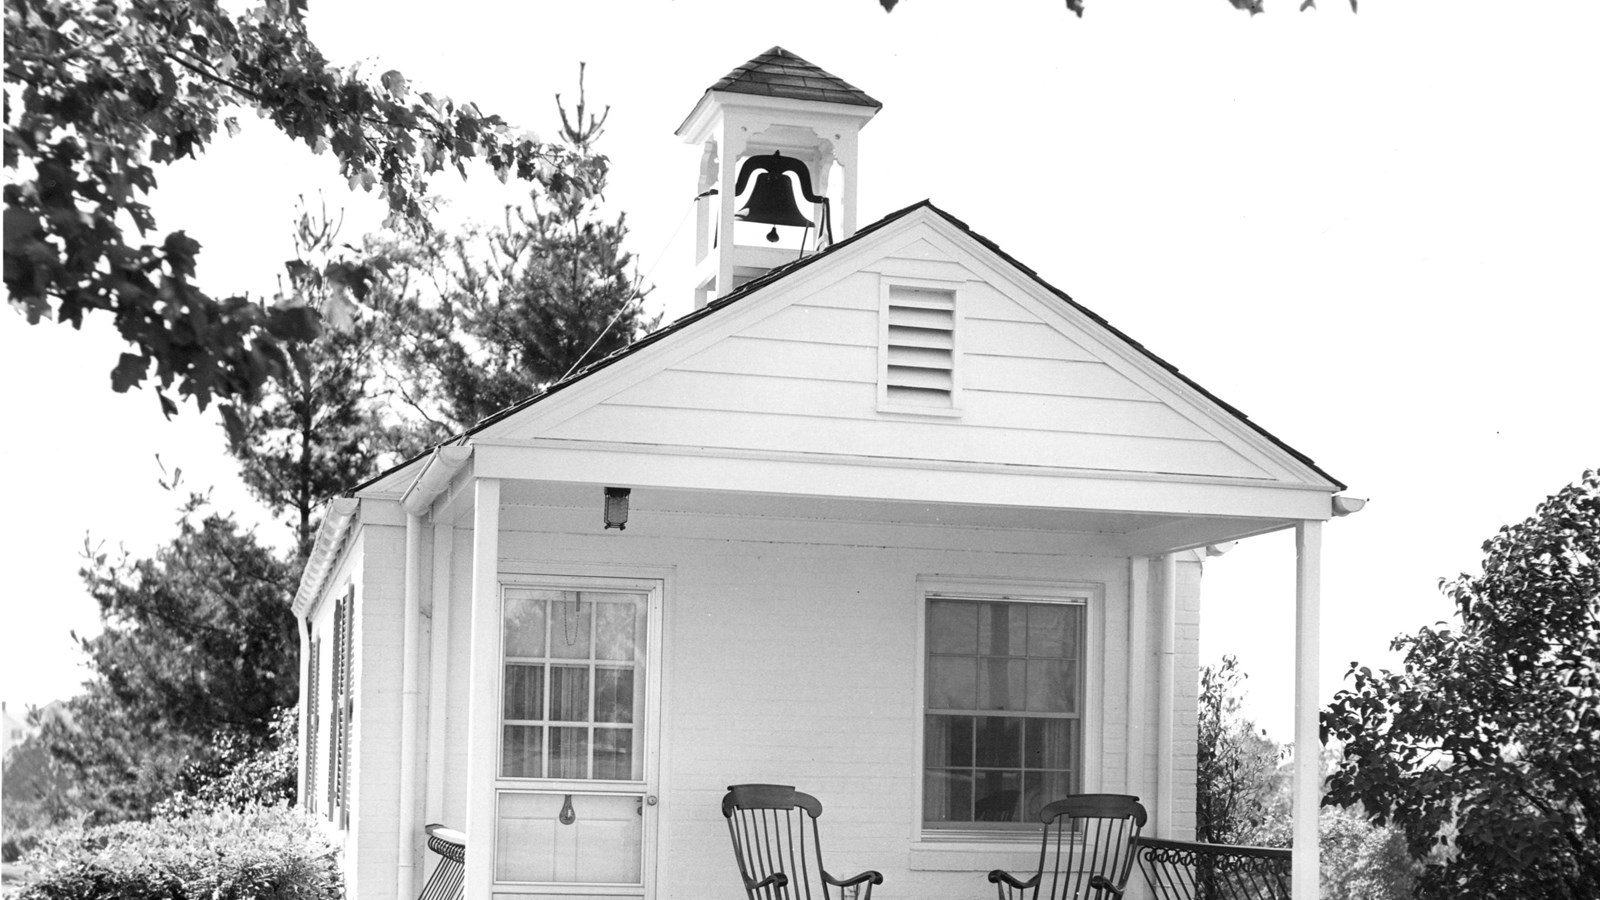 A black and white image of a white brick guesthouse with two rocking chairs in front